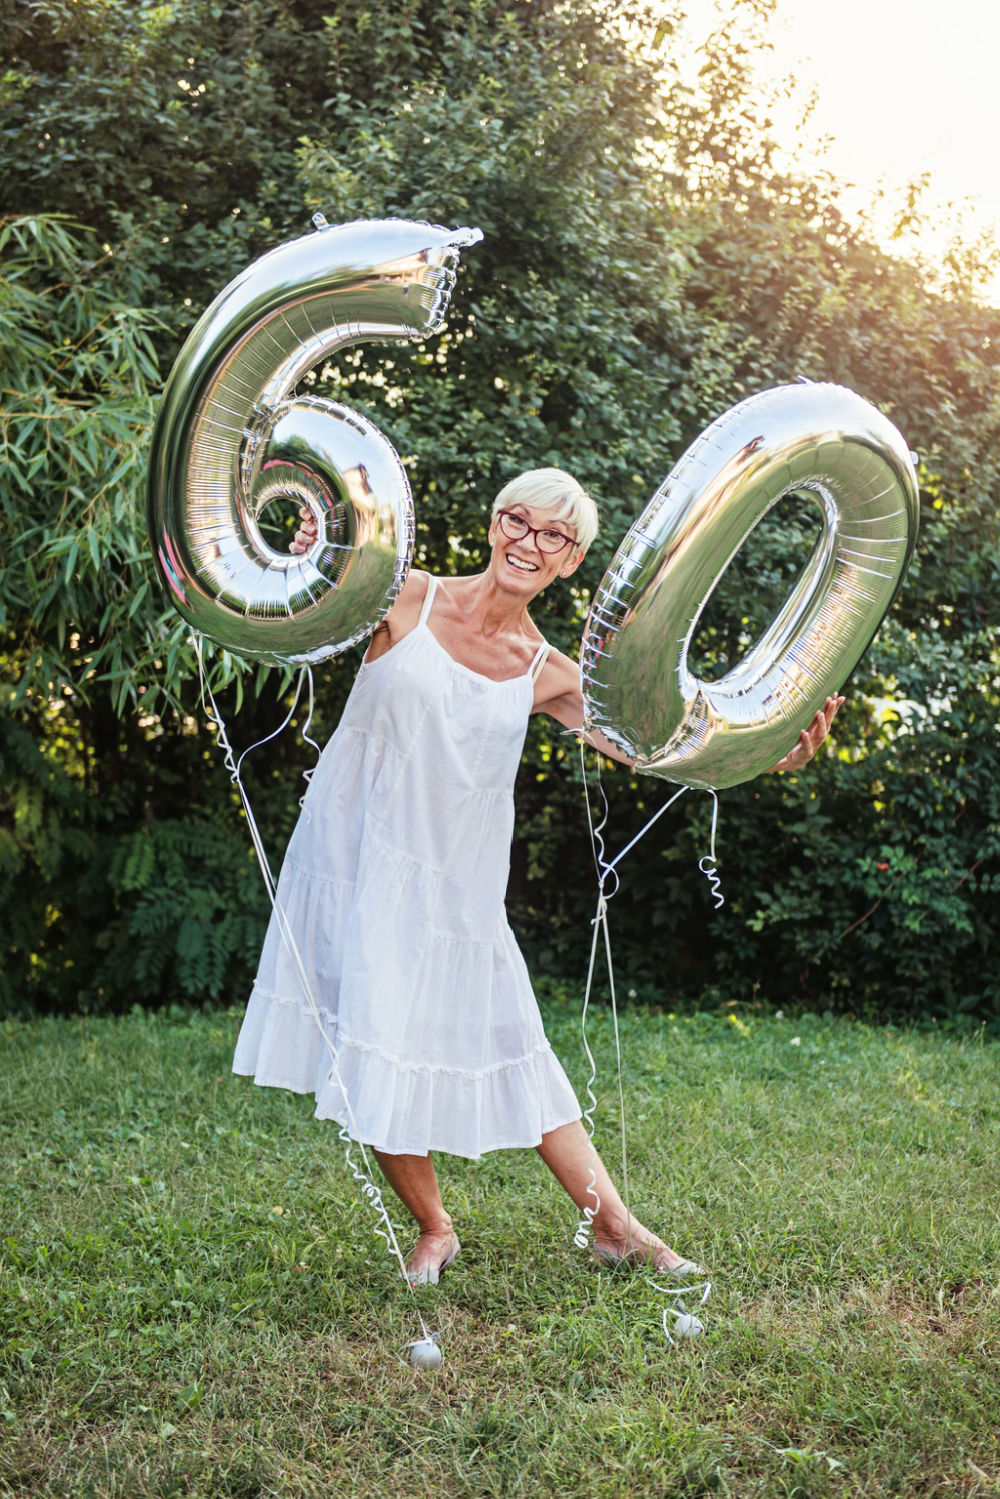 A 60th birthday celebration is a big deal in terms of quality of life compared to a few decades ago. Here are 60 ideas to get you to celebrate your sixtieth.